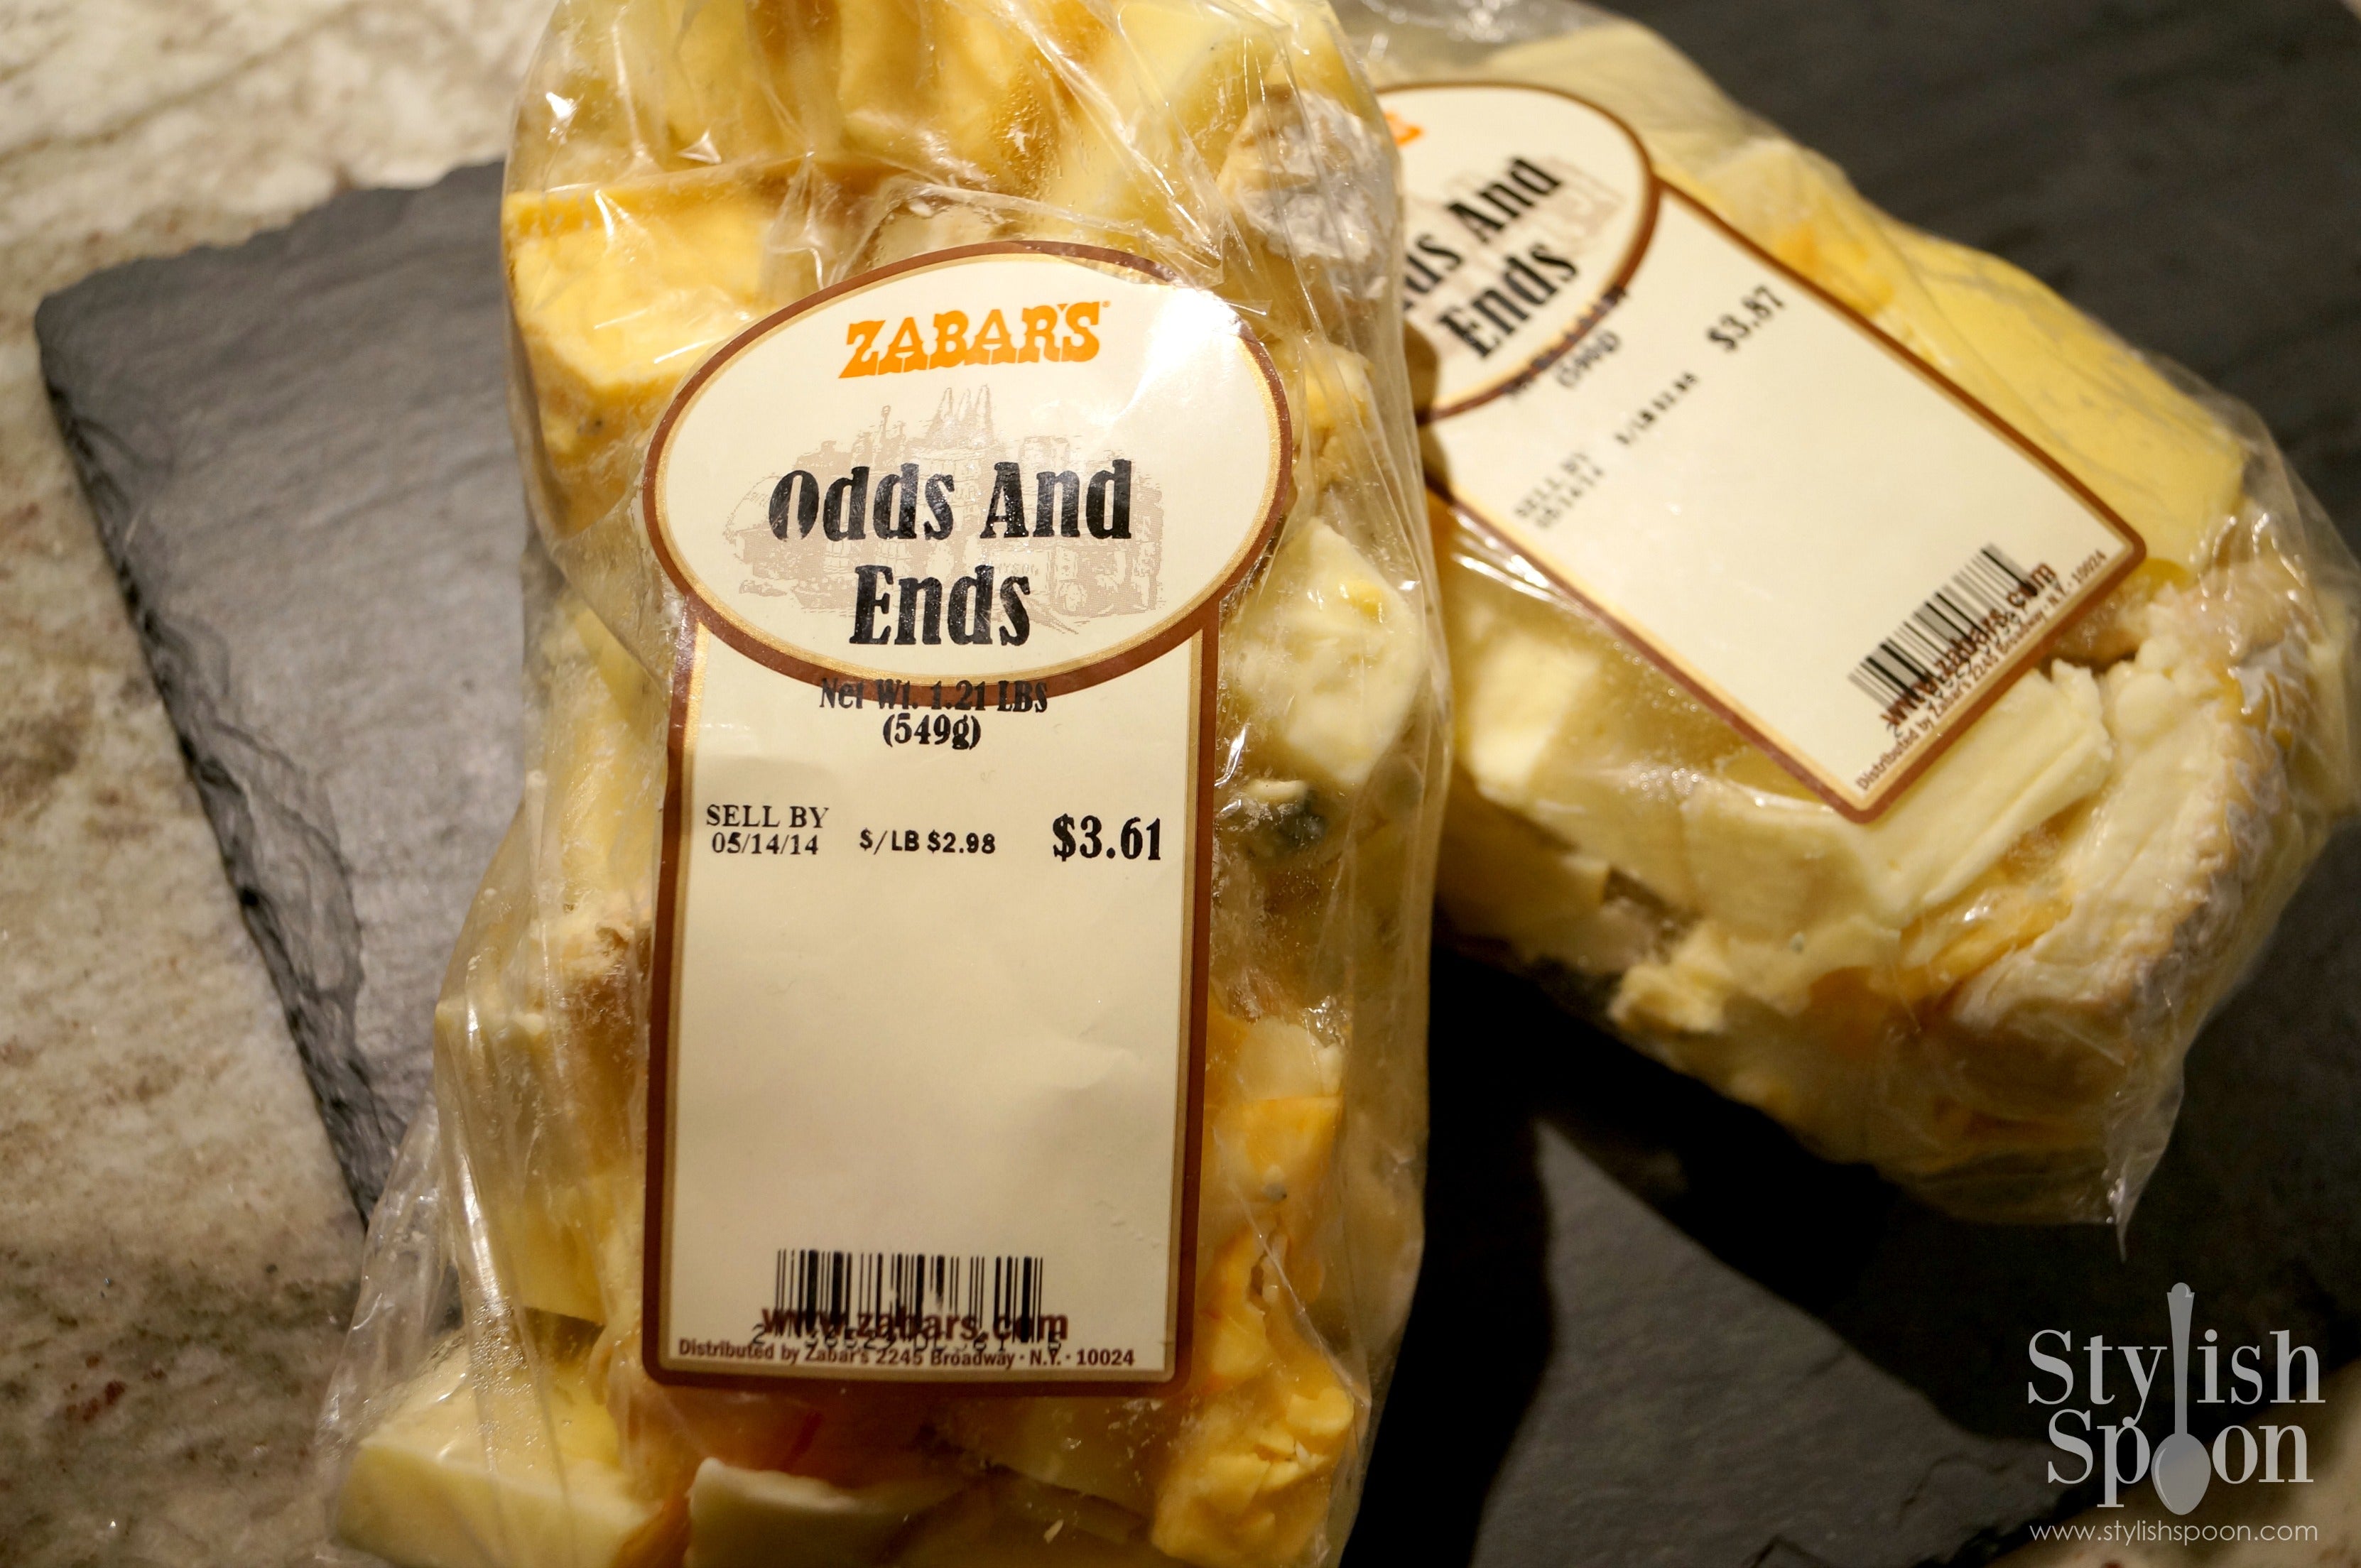  Friday Find  :: NYC {Bargain Cheese "Odds and Ends" at Zabars}